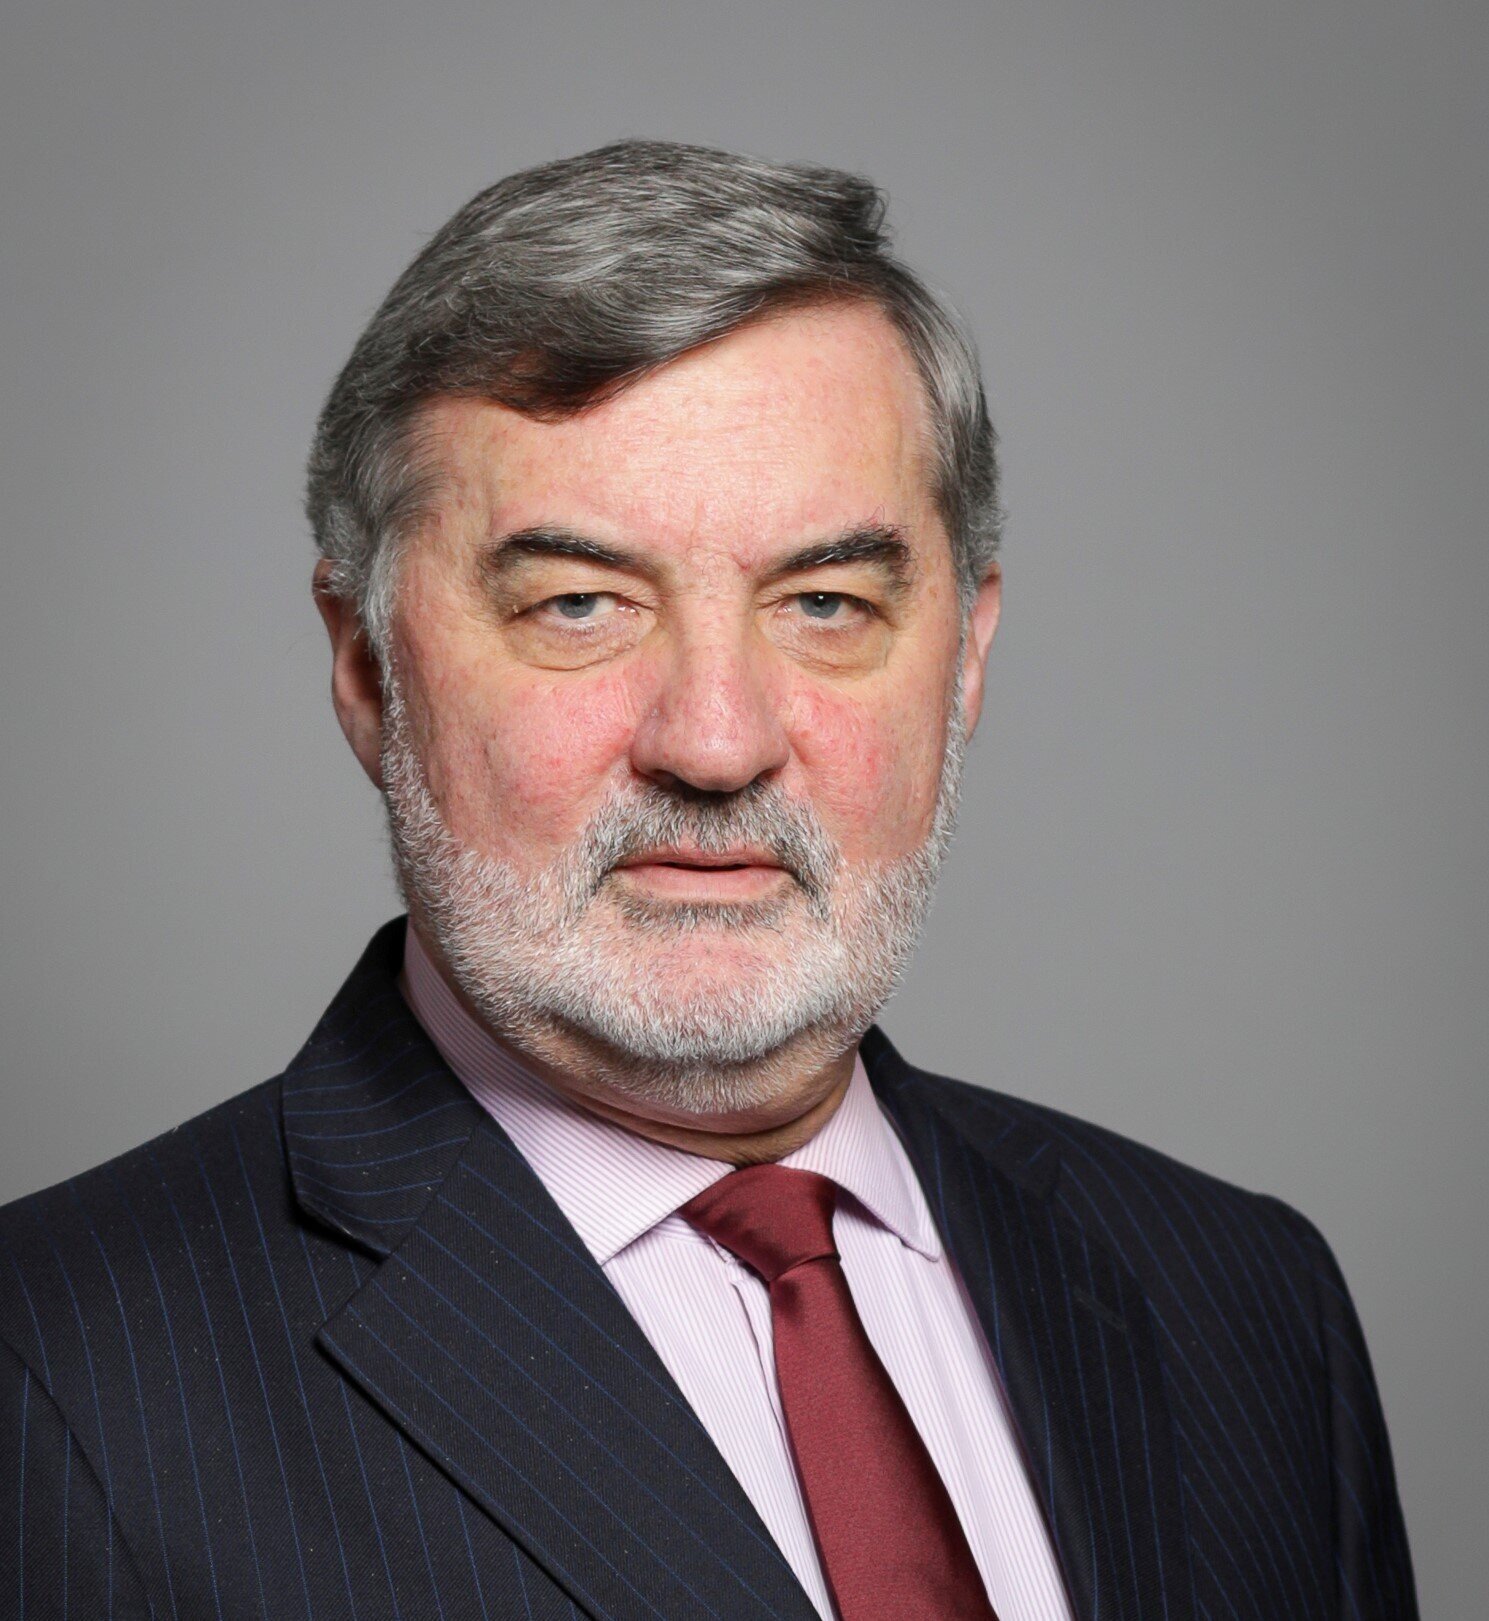 John, Lord Alderdice: Guest on Talking to Thinkers, September 2020